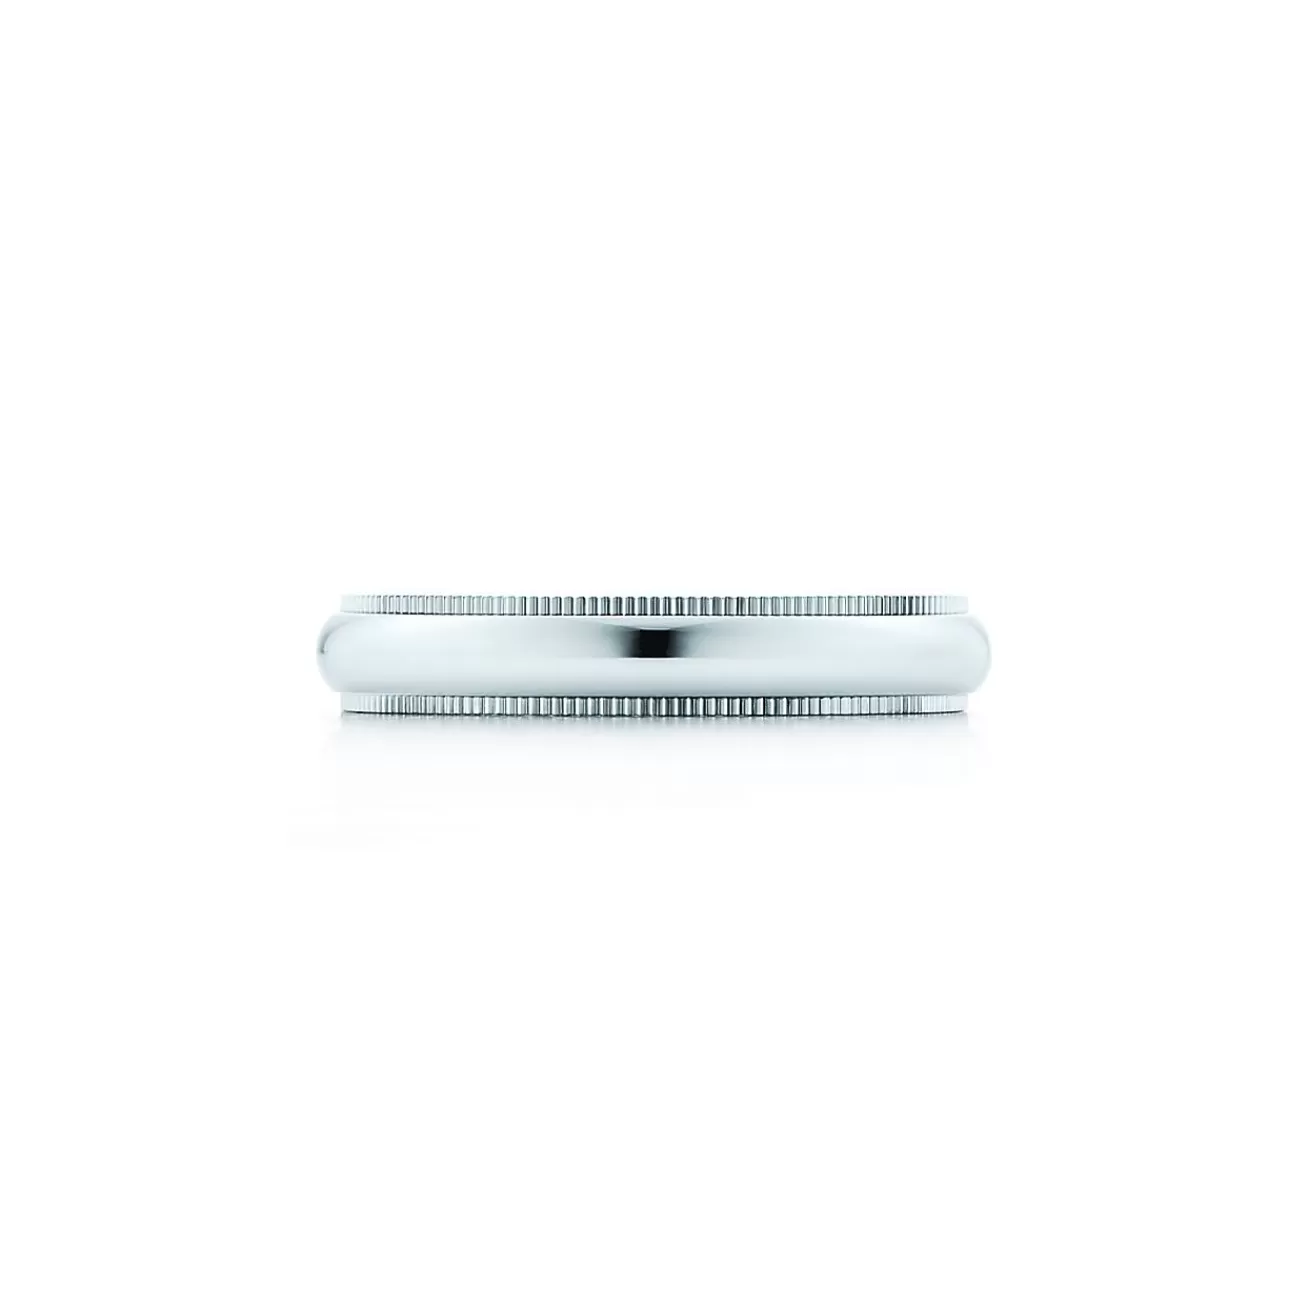 Tiffany & Co. Tiffany Together Milgrain Band Ring in Platinum, 4 mm Wide | ^Women Rings | Platinum Jewelry